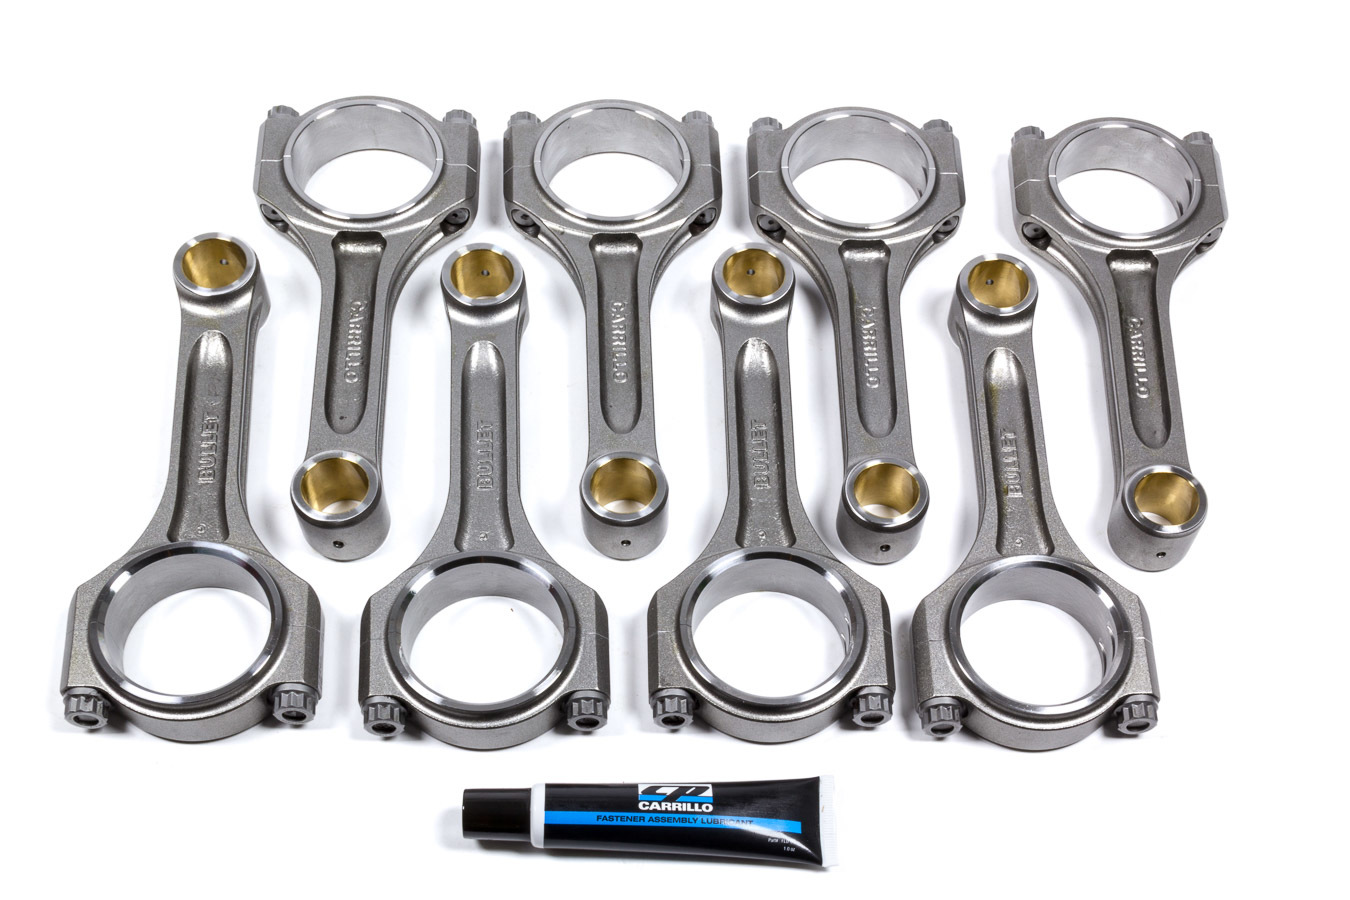 Bullet Pistons BC21-60071-8 - Connecting Rod, I Beam, 6.000 in Long, Bushed, 7/16 in Cap Screws, Katech H11, Small Block Chevy, Set of 8